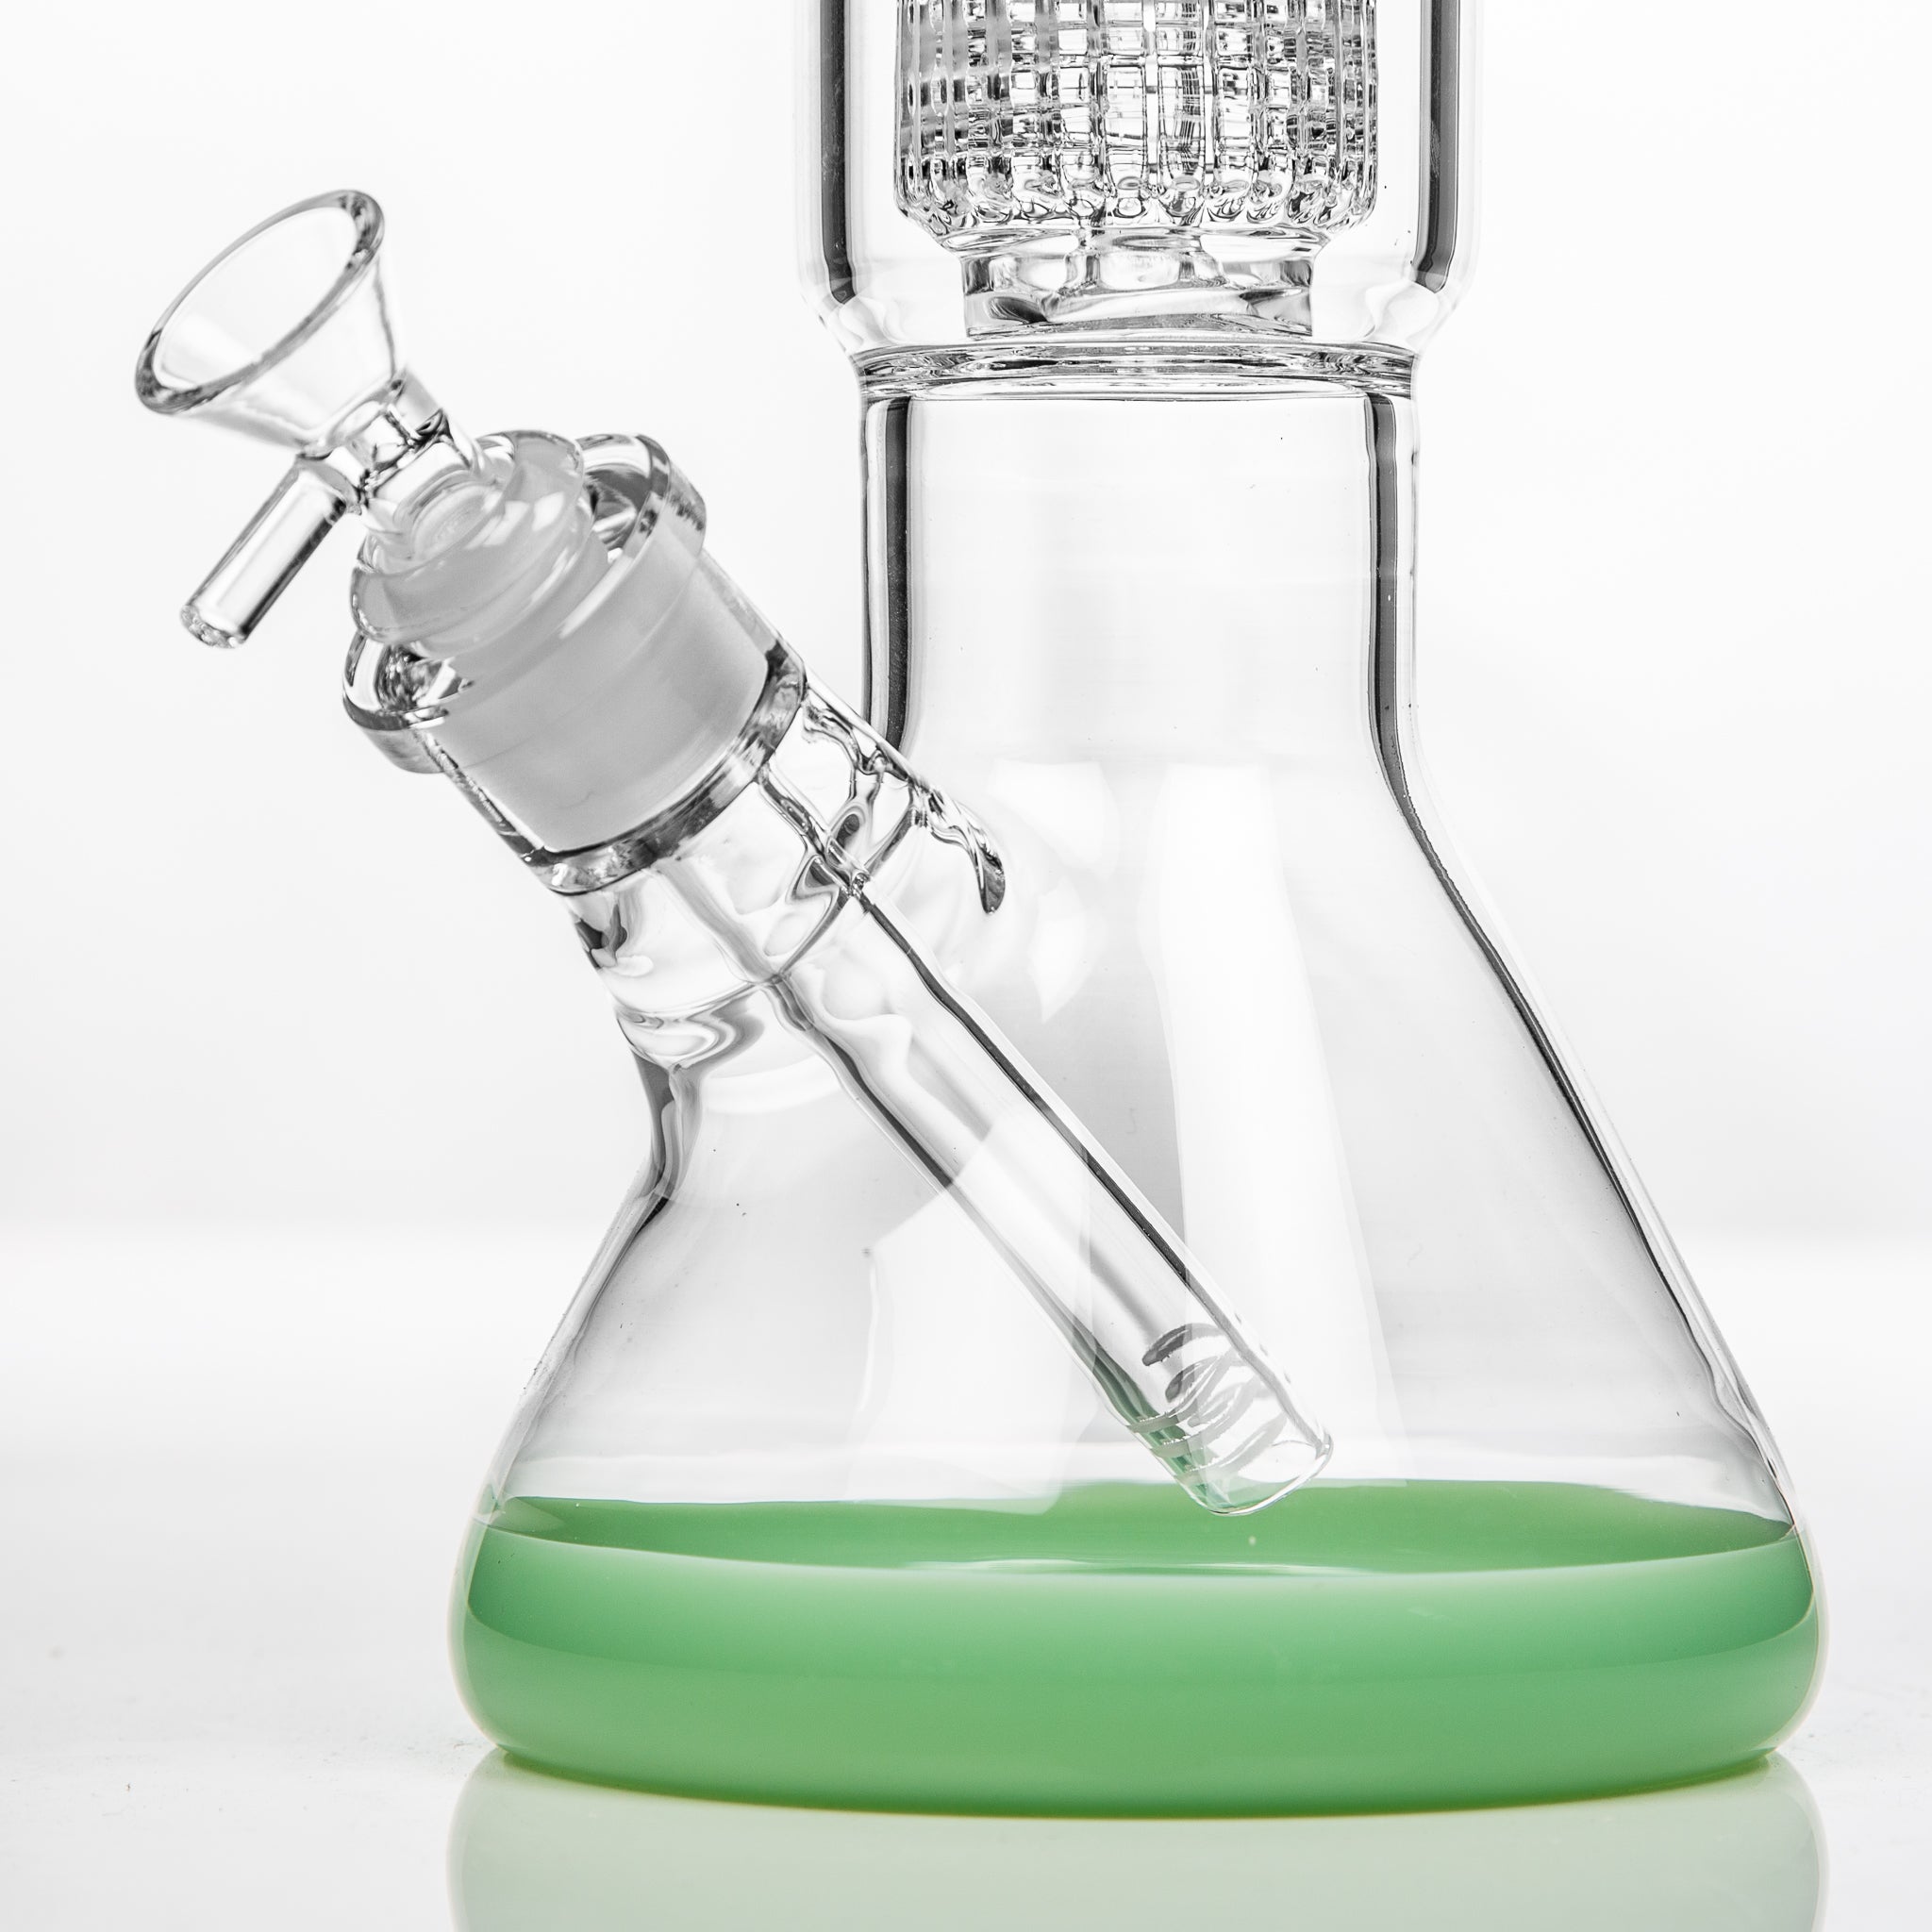 The base of a glass beaker bong showing the diffused down stem and cone piece as well as the percolator for diffusion.